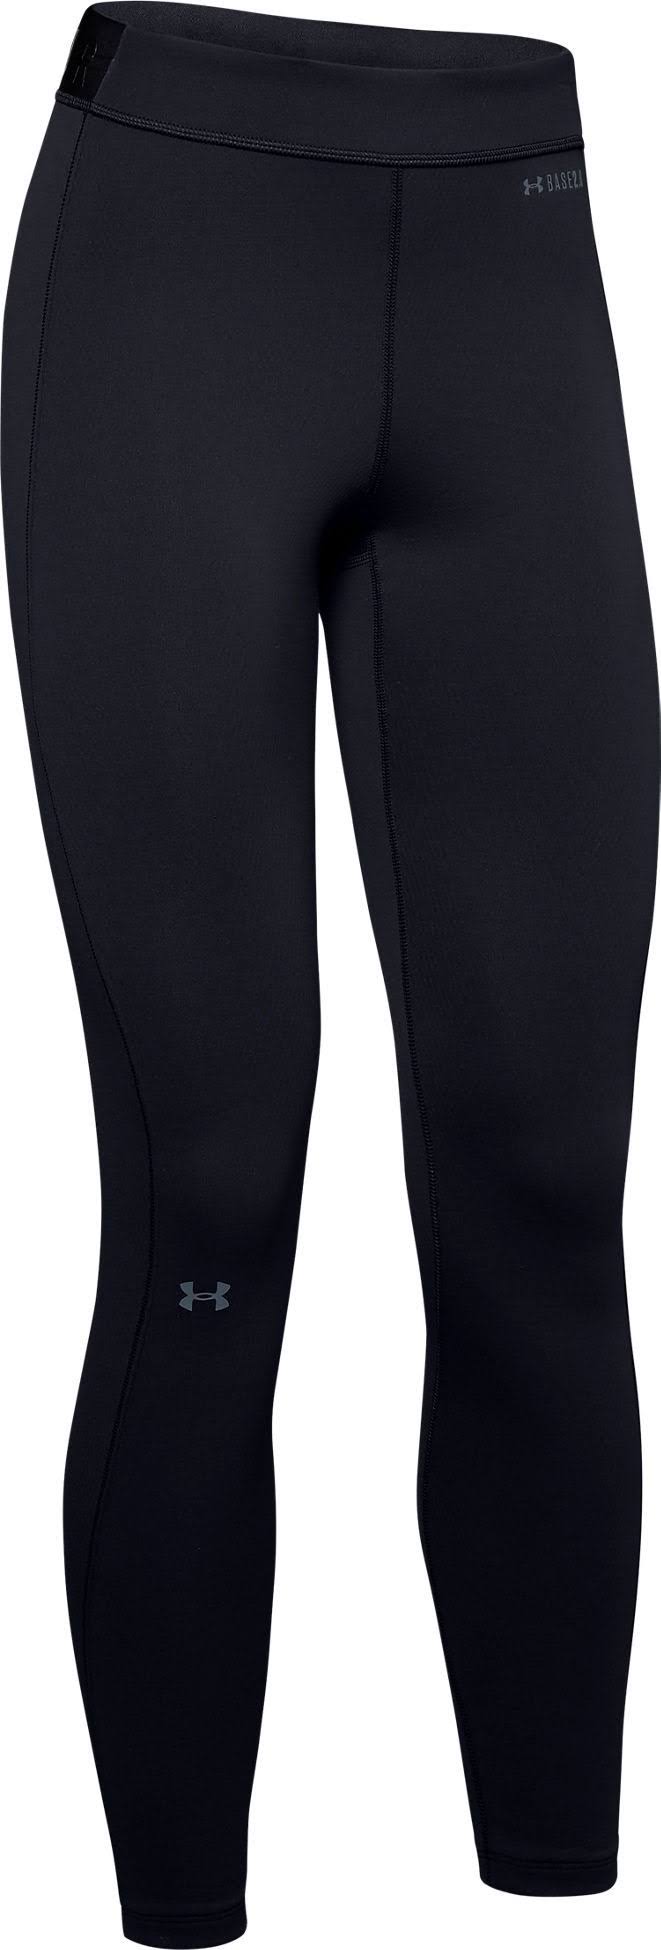 Under Armour Women's Packaged Base 2 0 Legging - X Small, Black